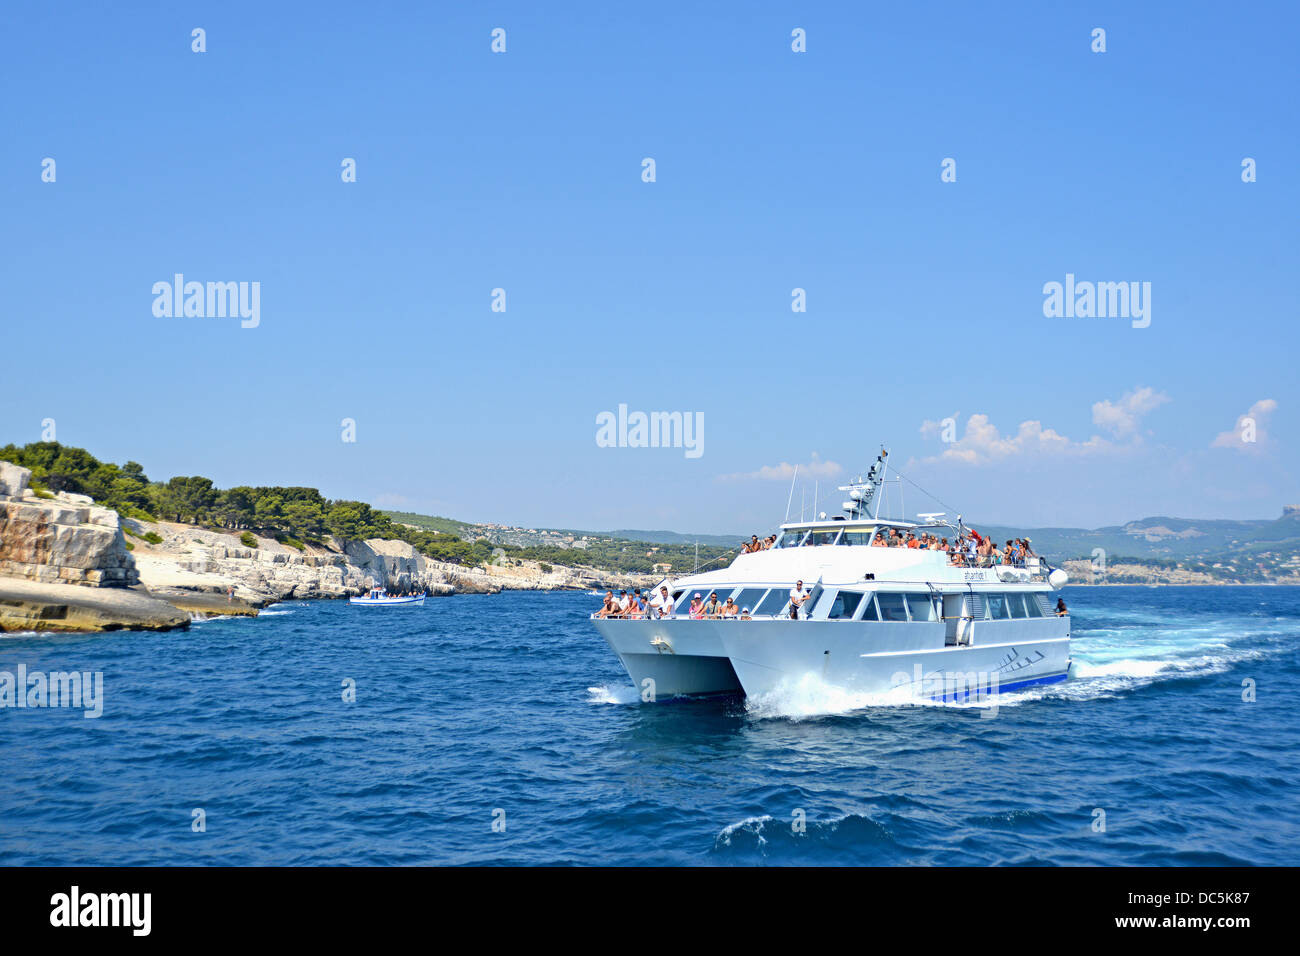 boating near The Calanques of Marseille Bouche-du-Rhone France Stock Photo